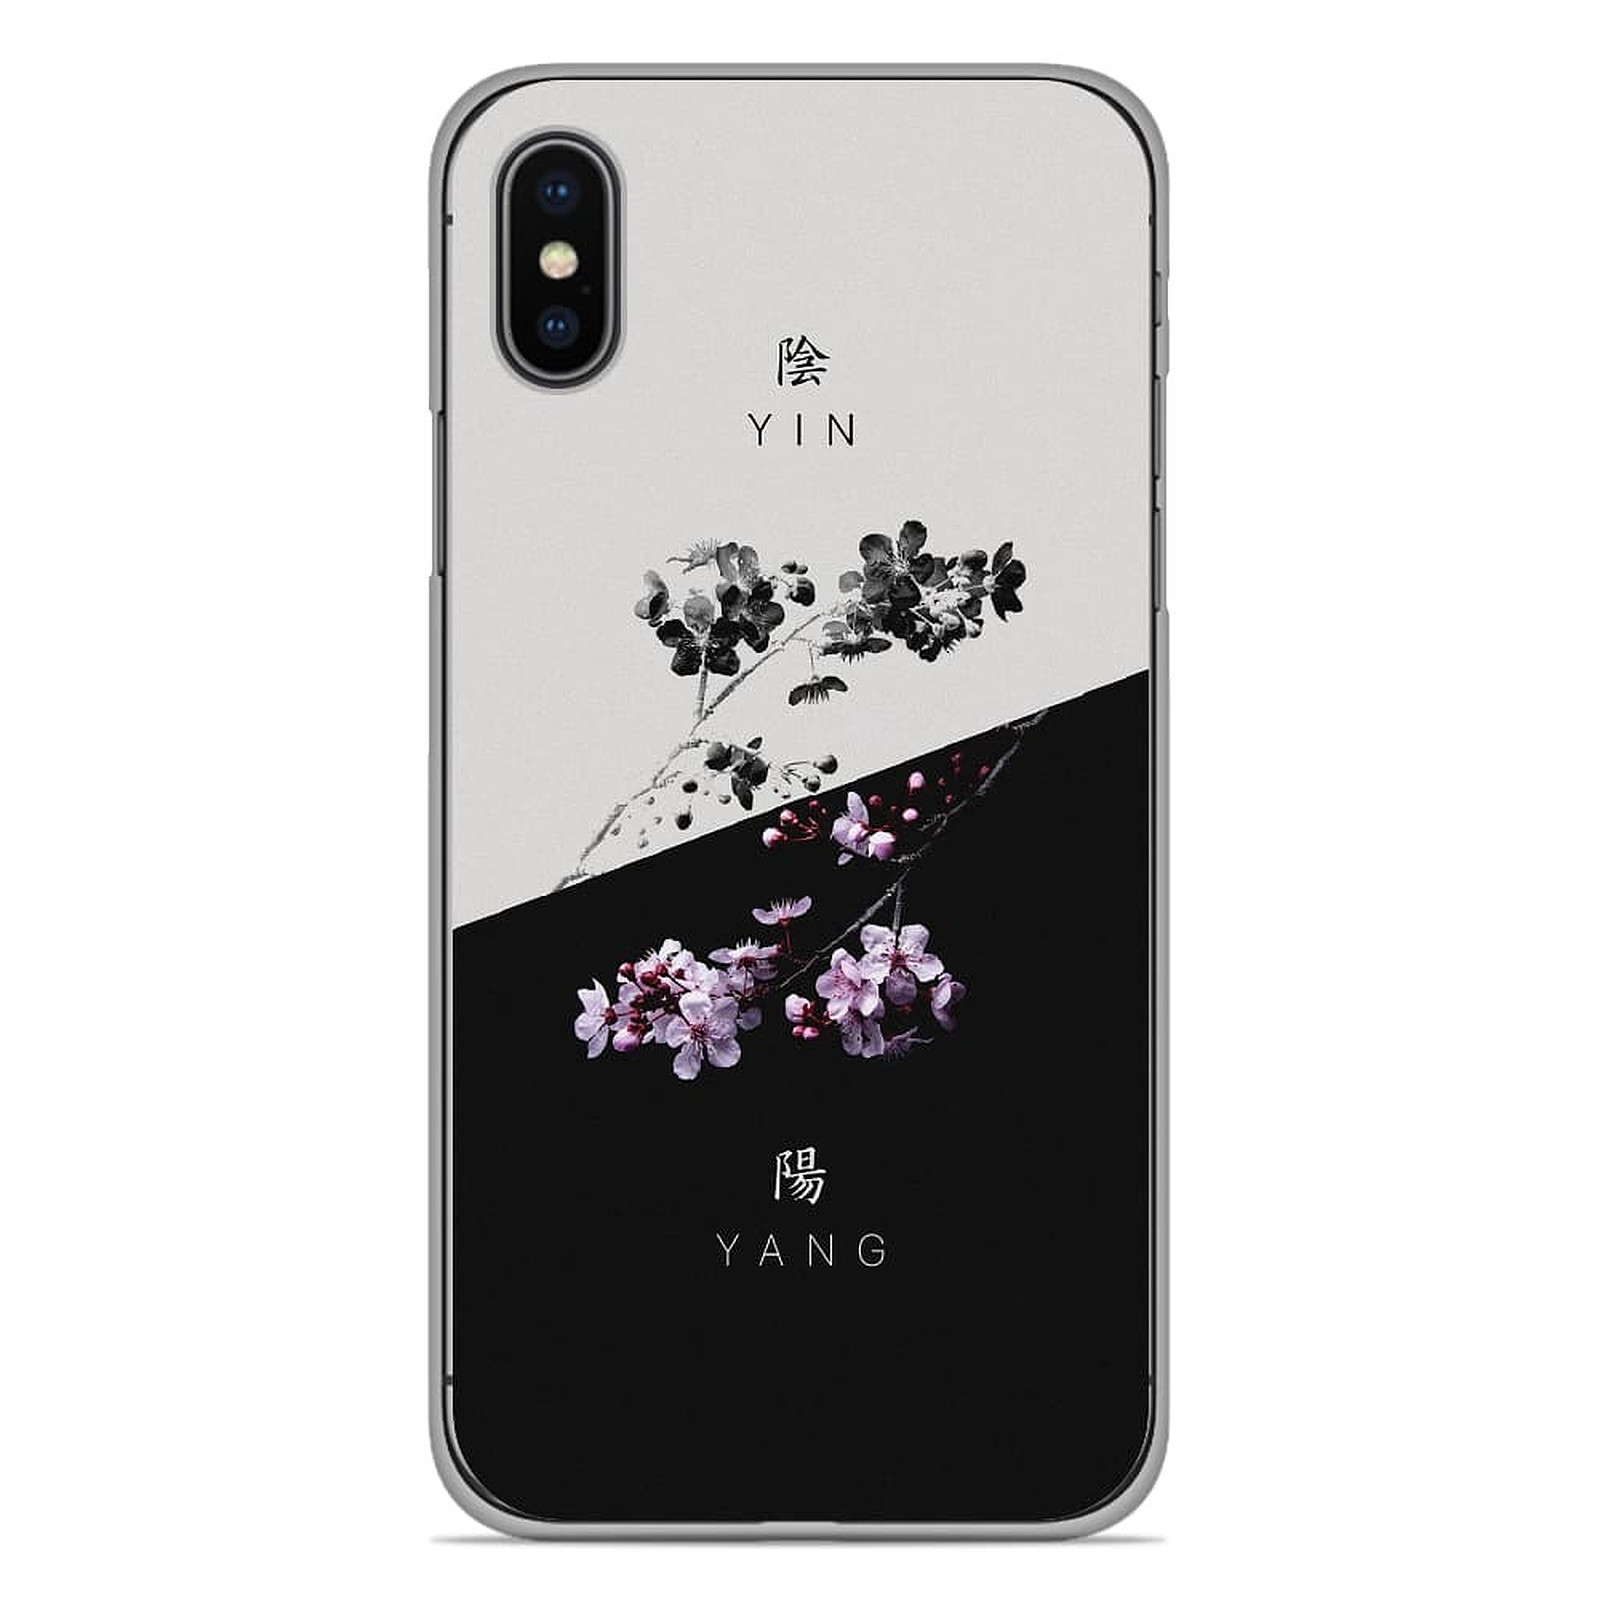 1001 Coques Coque silicone gel Apple iPhone X / XS motif Yin et Yang - Coque telephone 1001Coques